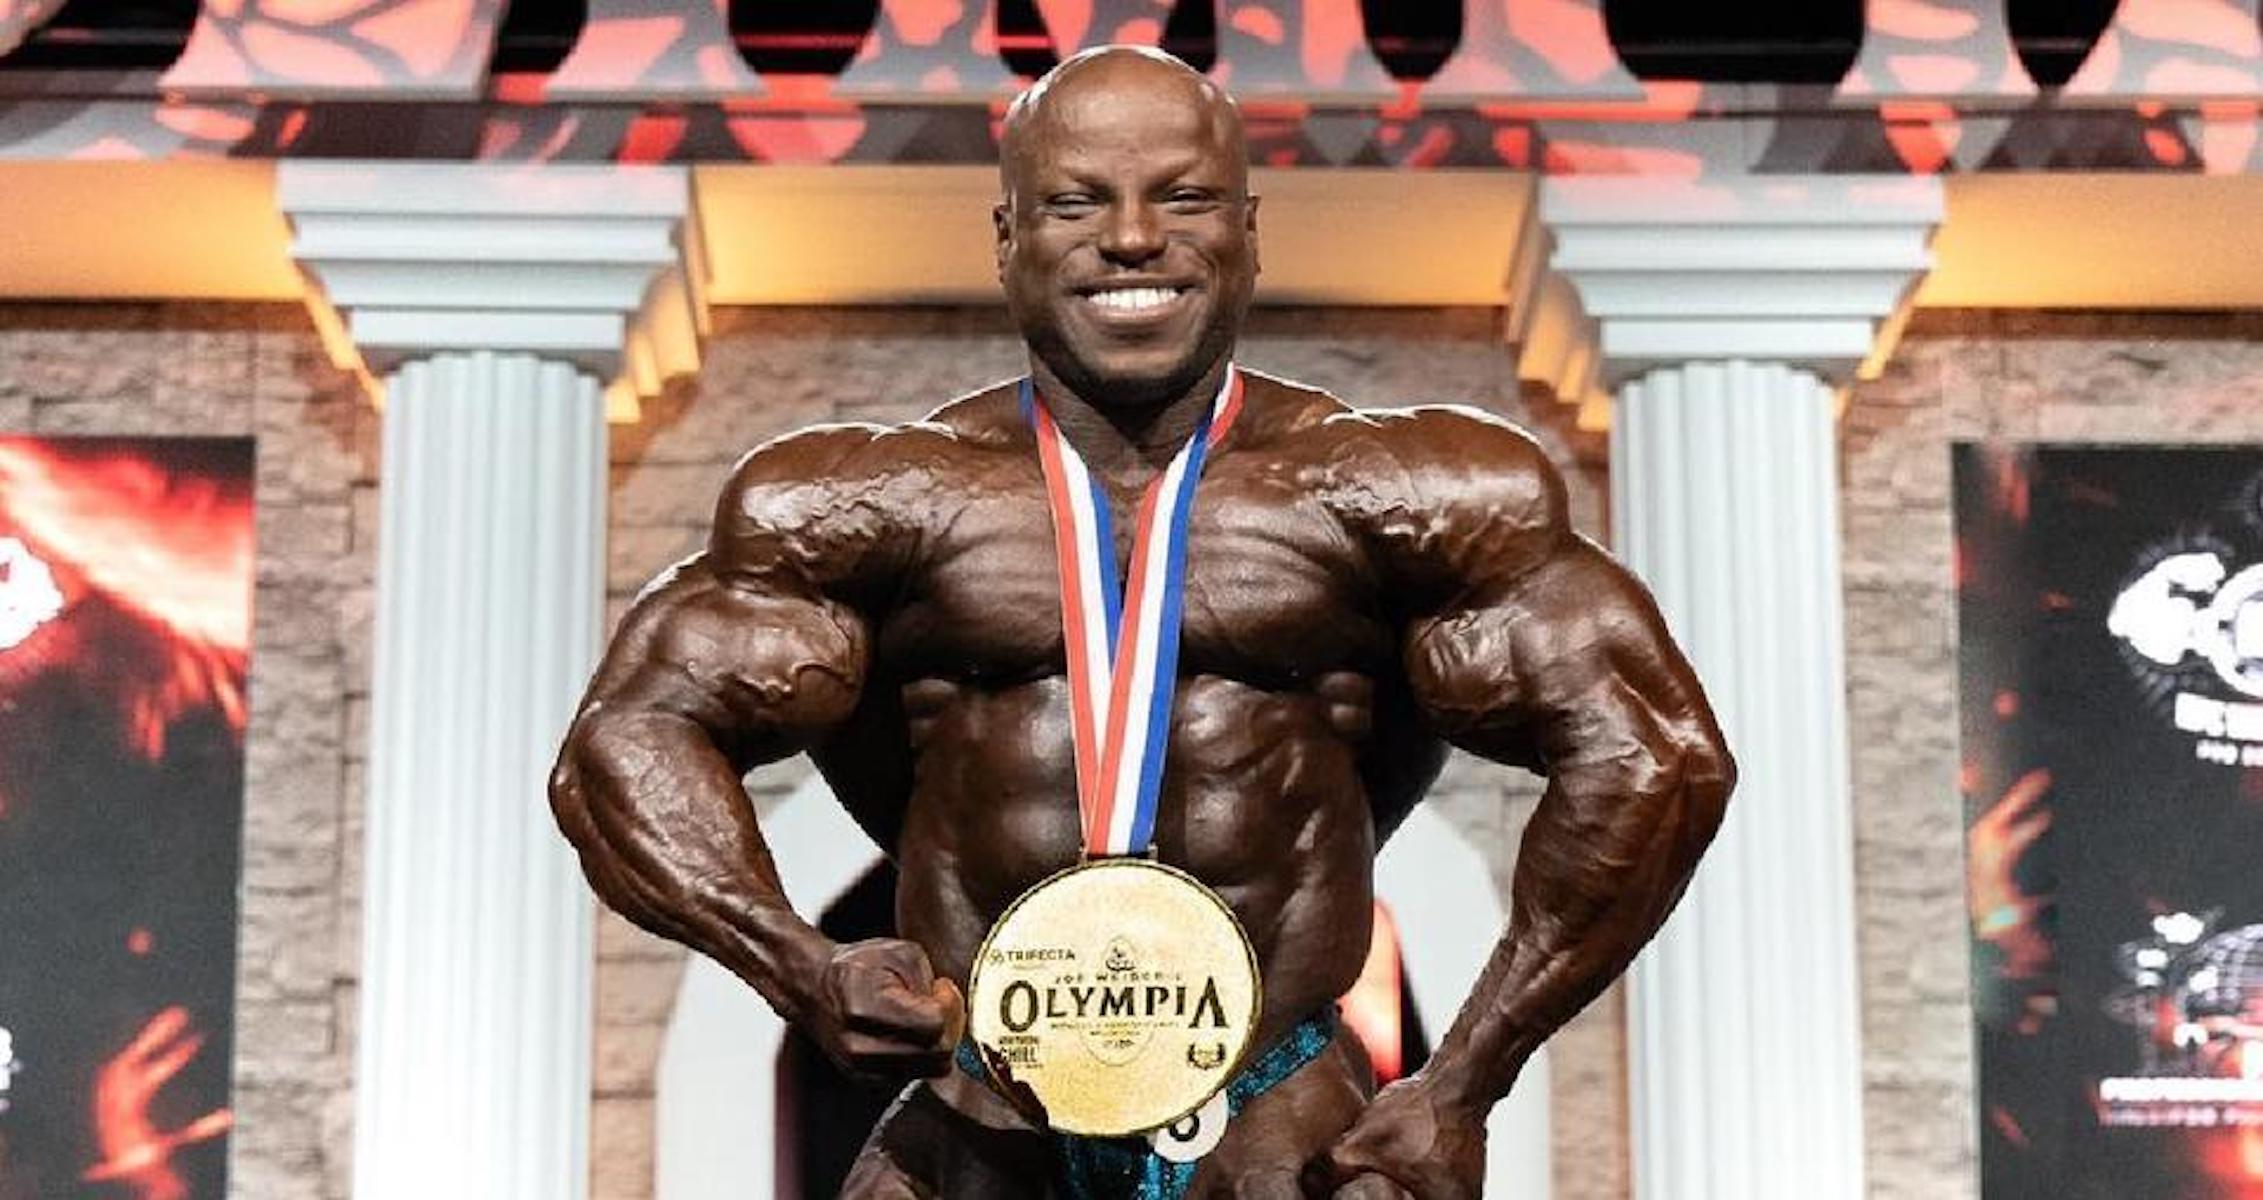 Shaun Clarida Looking To Compete In Both Men’s Open And 212 Olympia in 2022